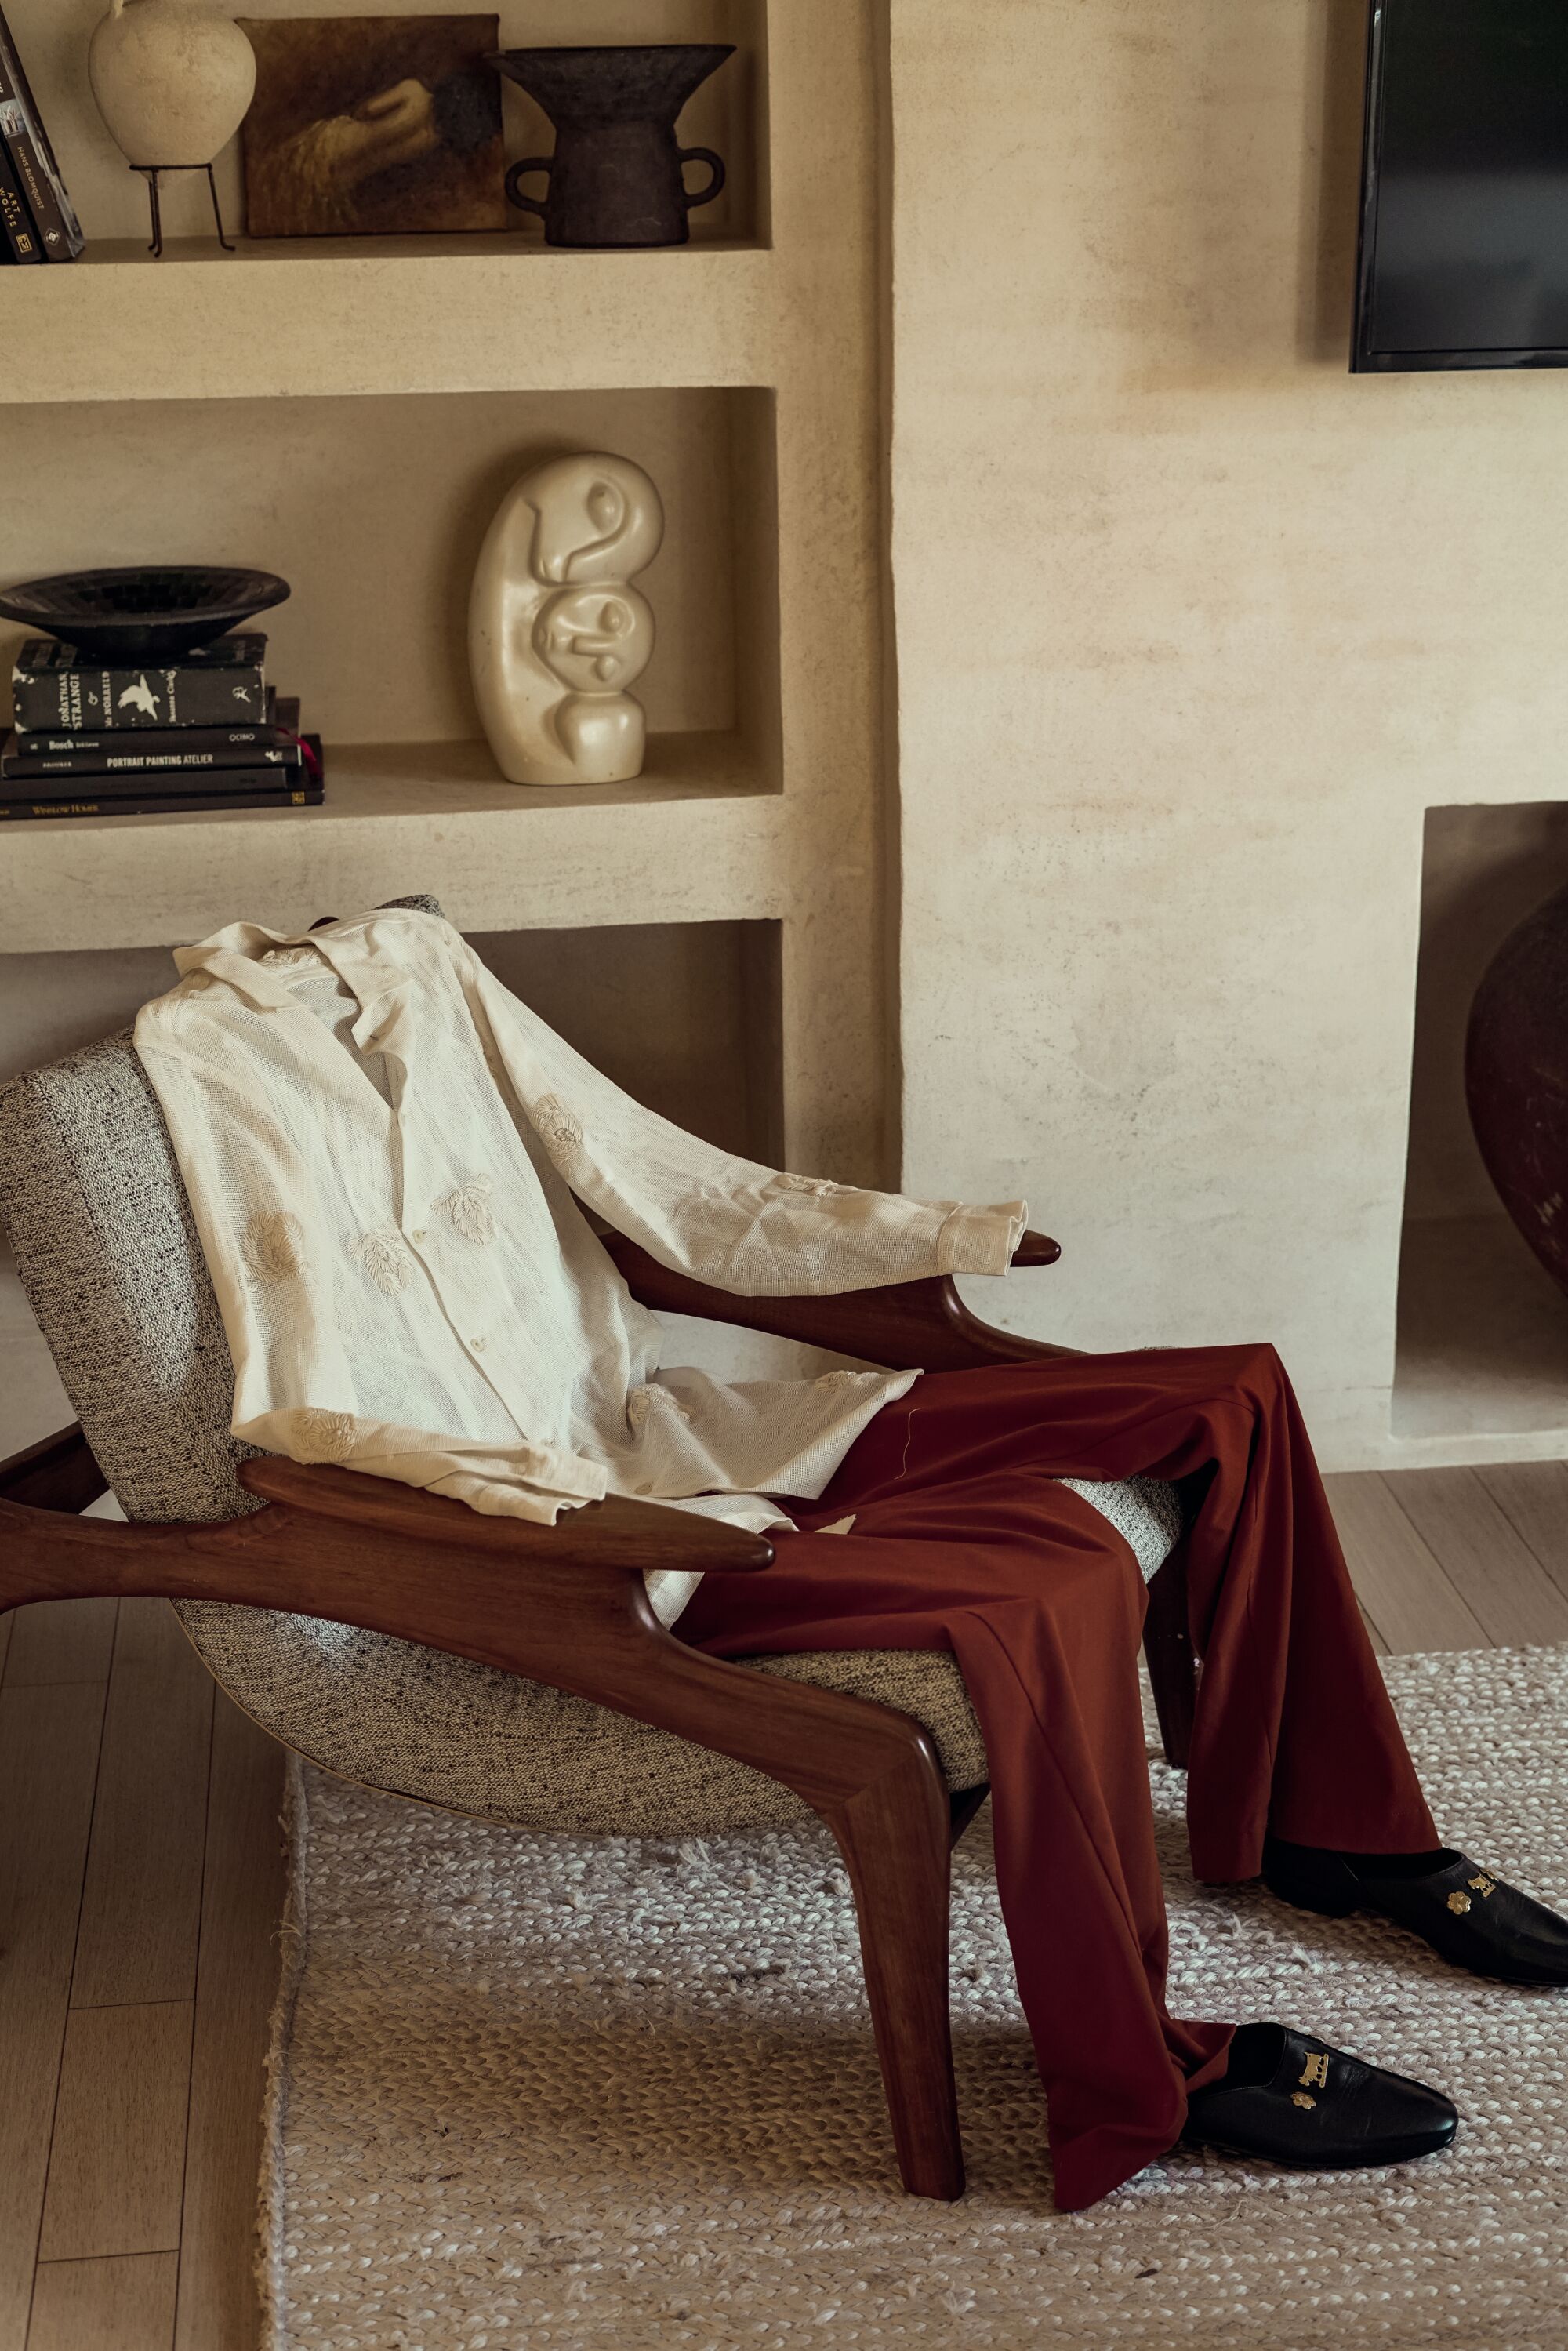 Bode Appenzeller house shoes and Bode Savoy Ribbon long sleeve tunic sit in a chair as if being worn by a human.